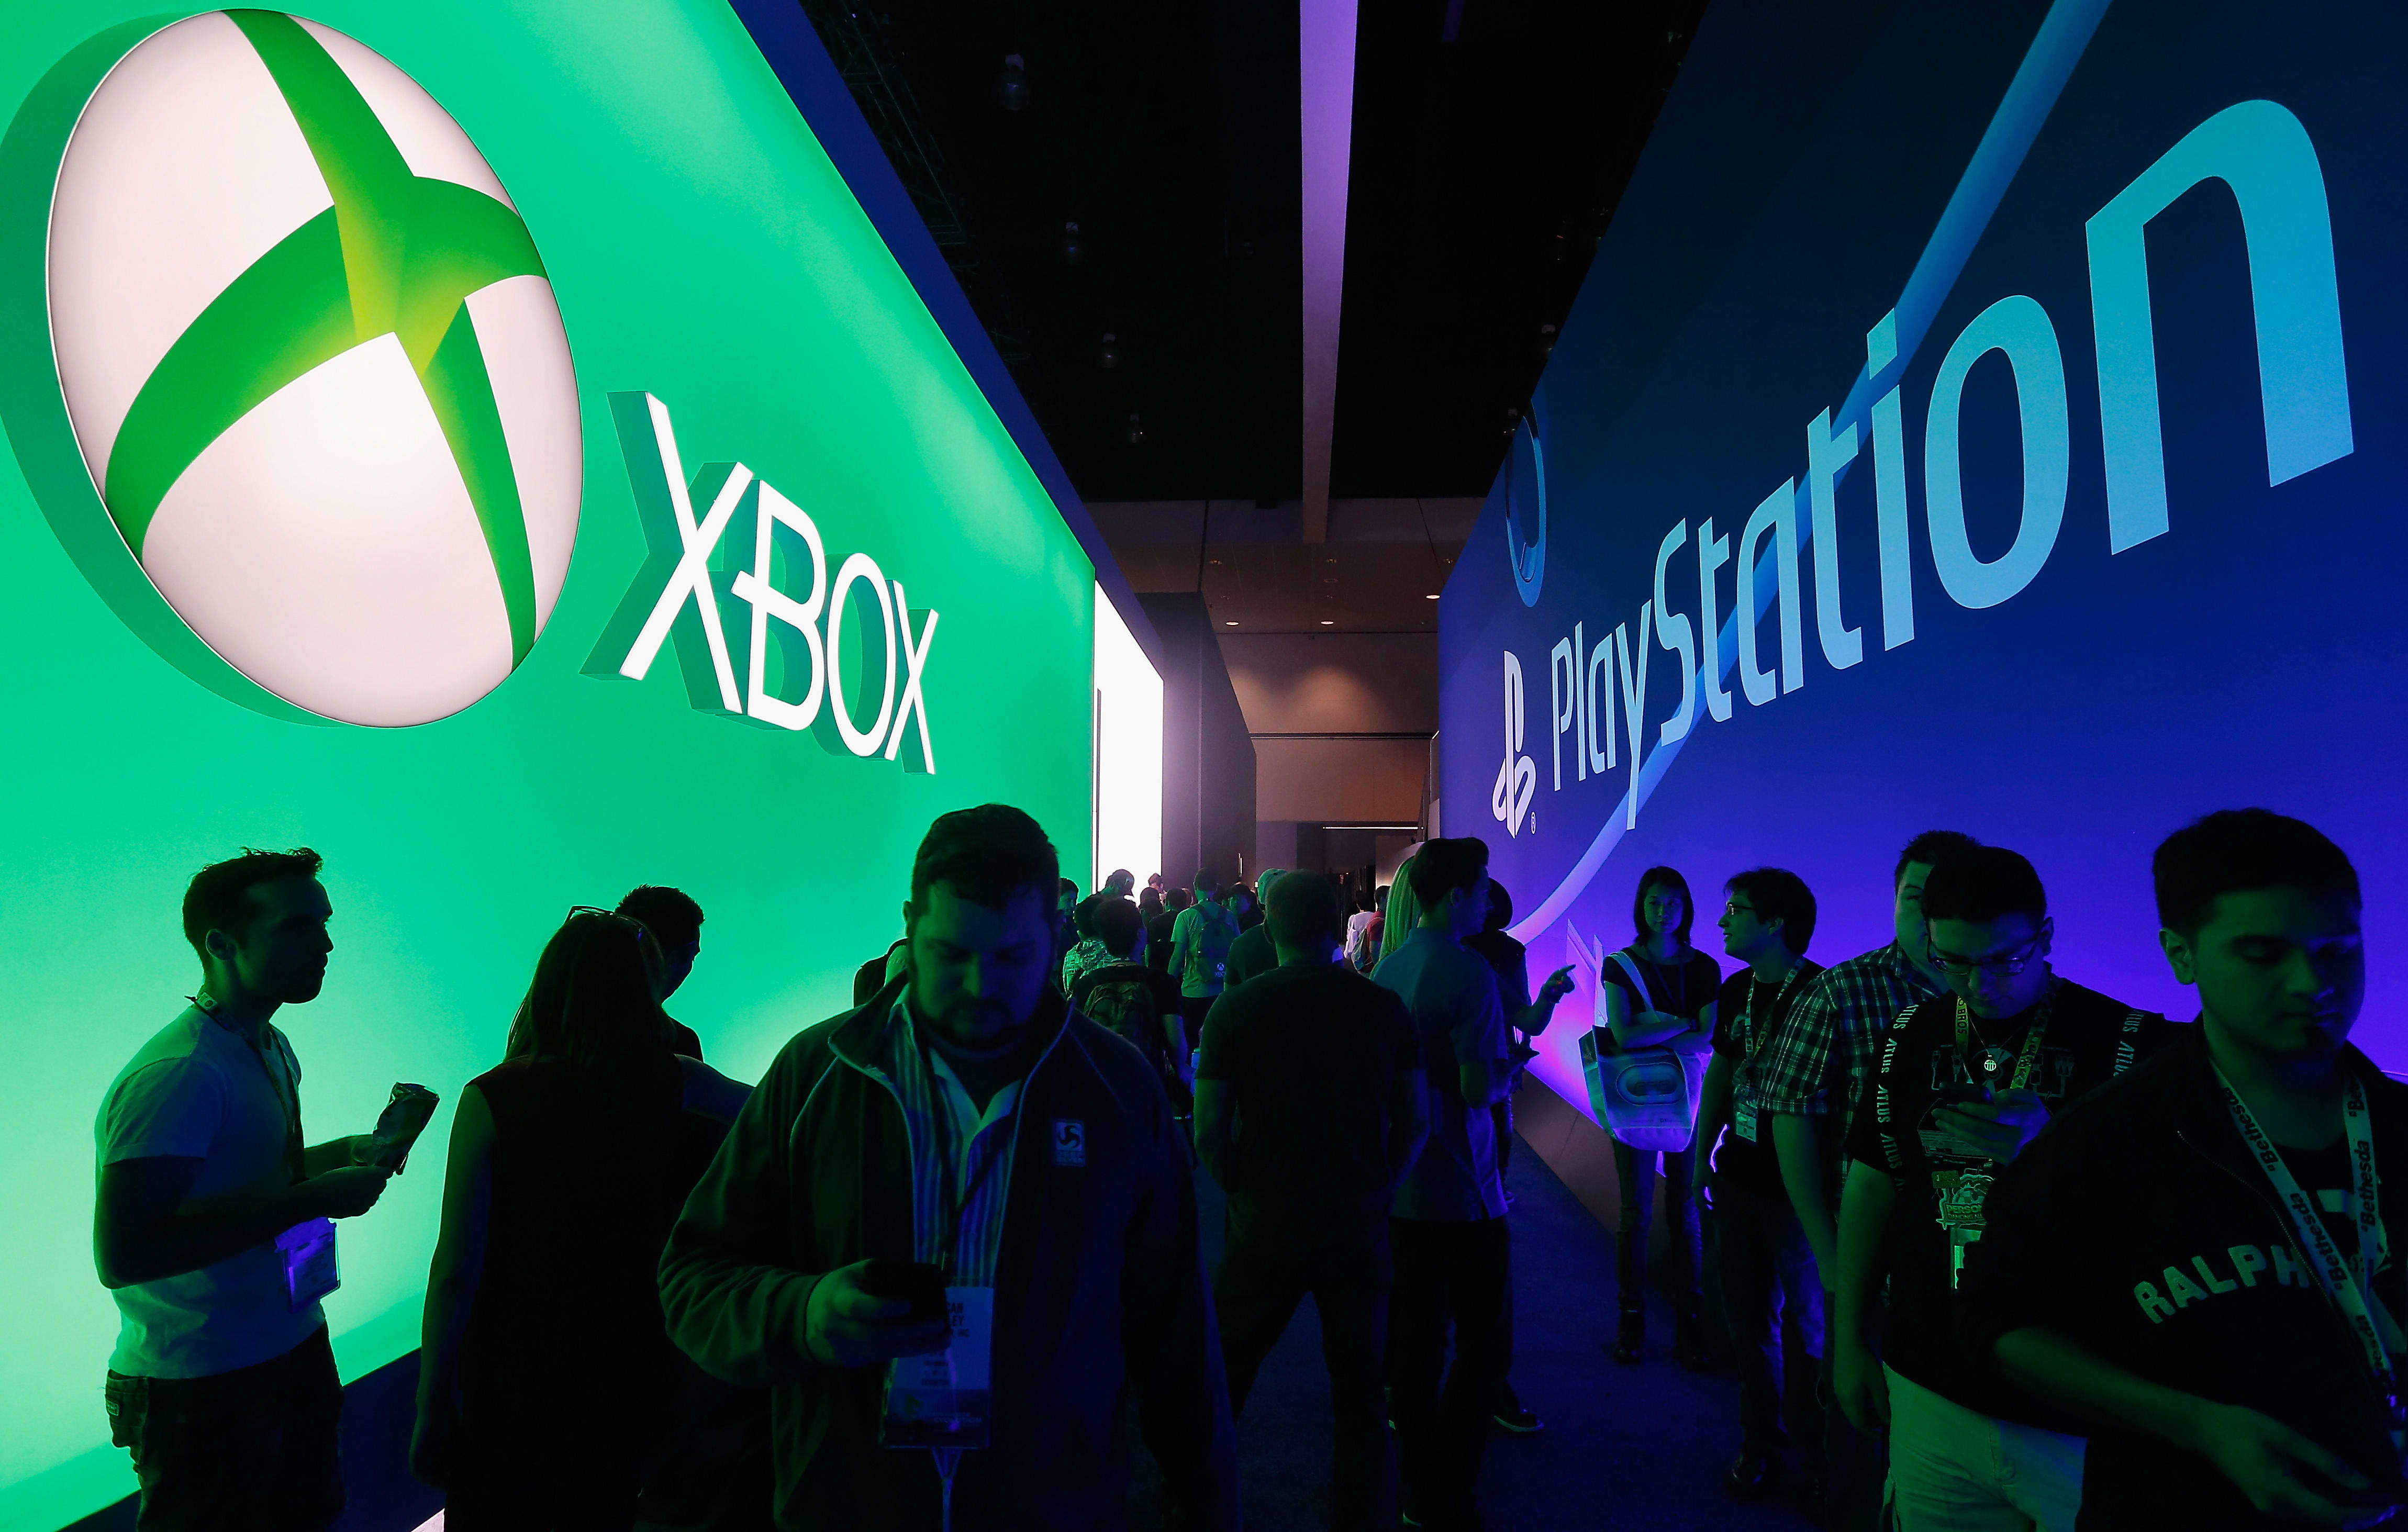 The PlayStation, Xbox and Microsoft have confirmed a brand-new